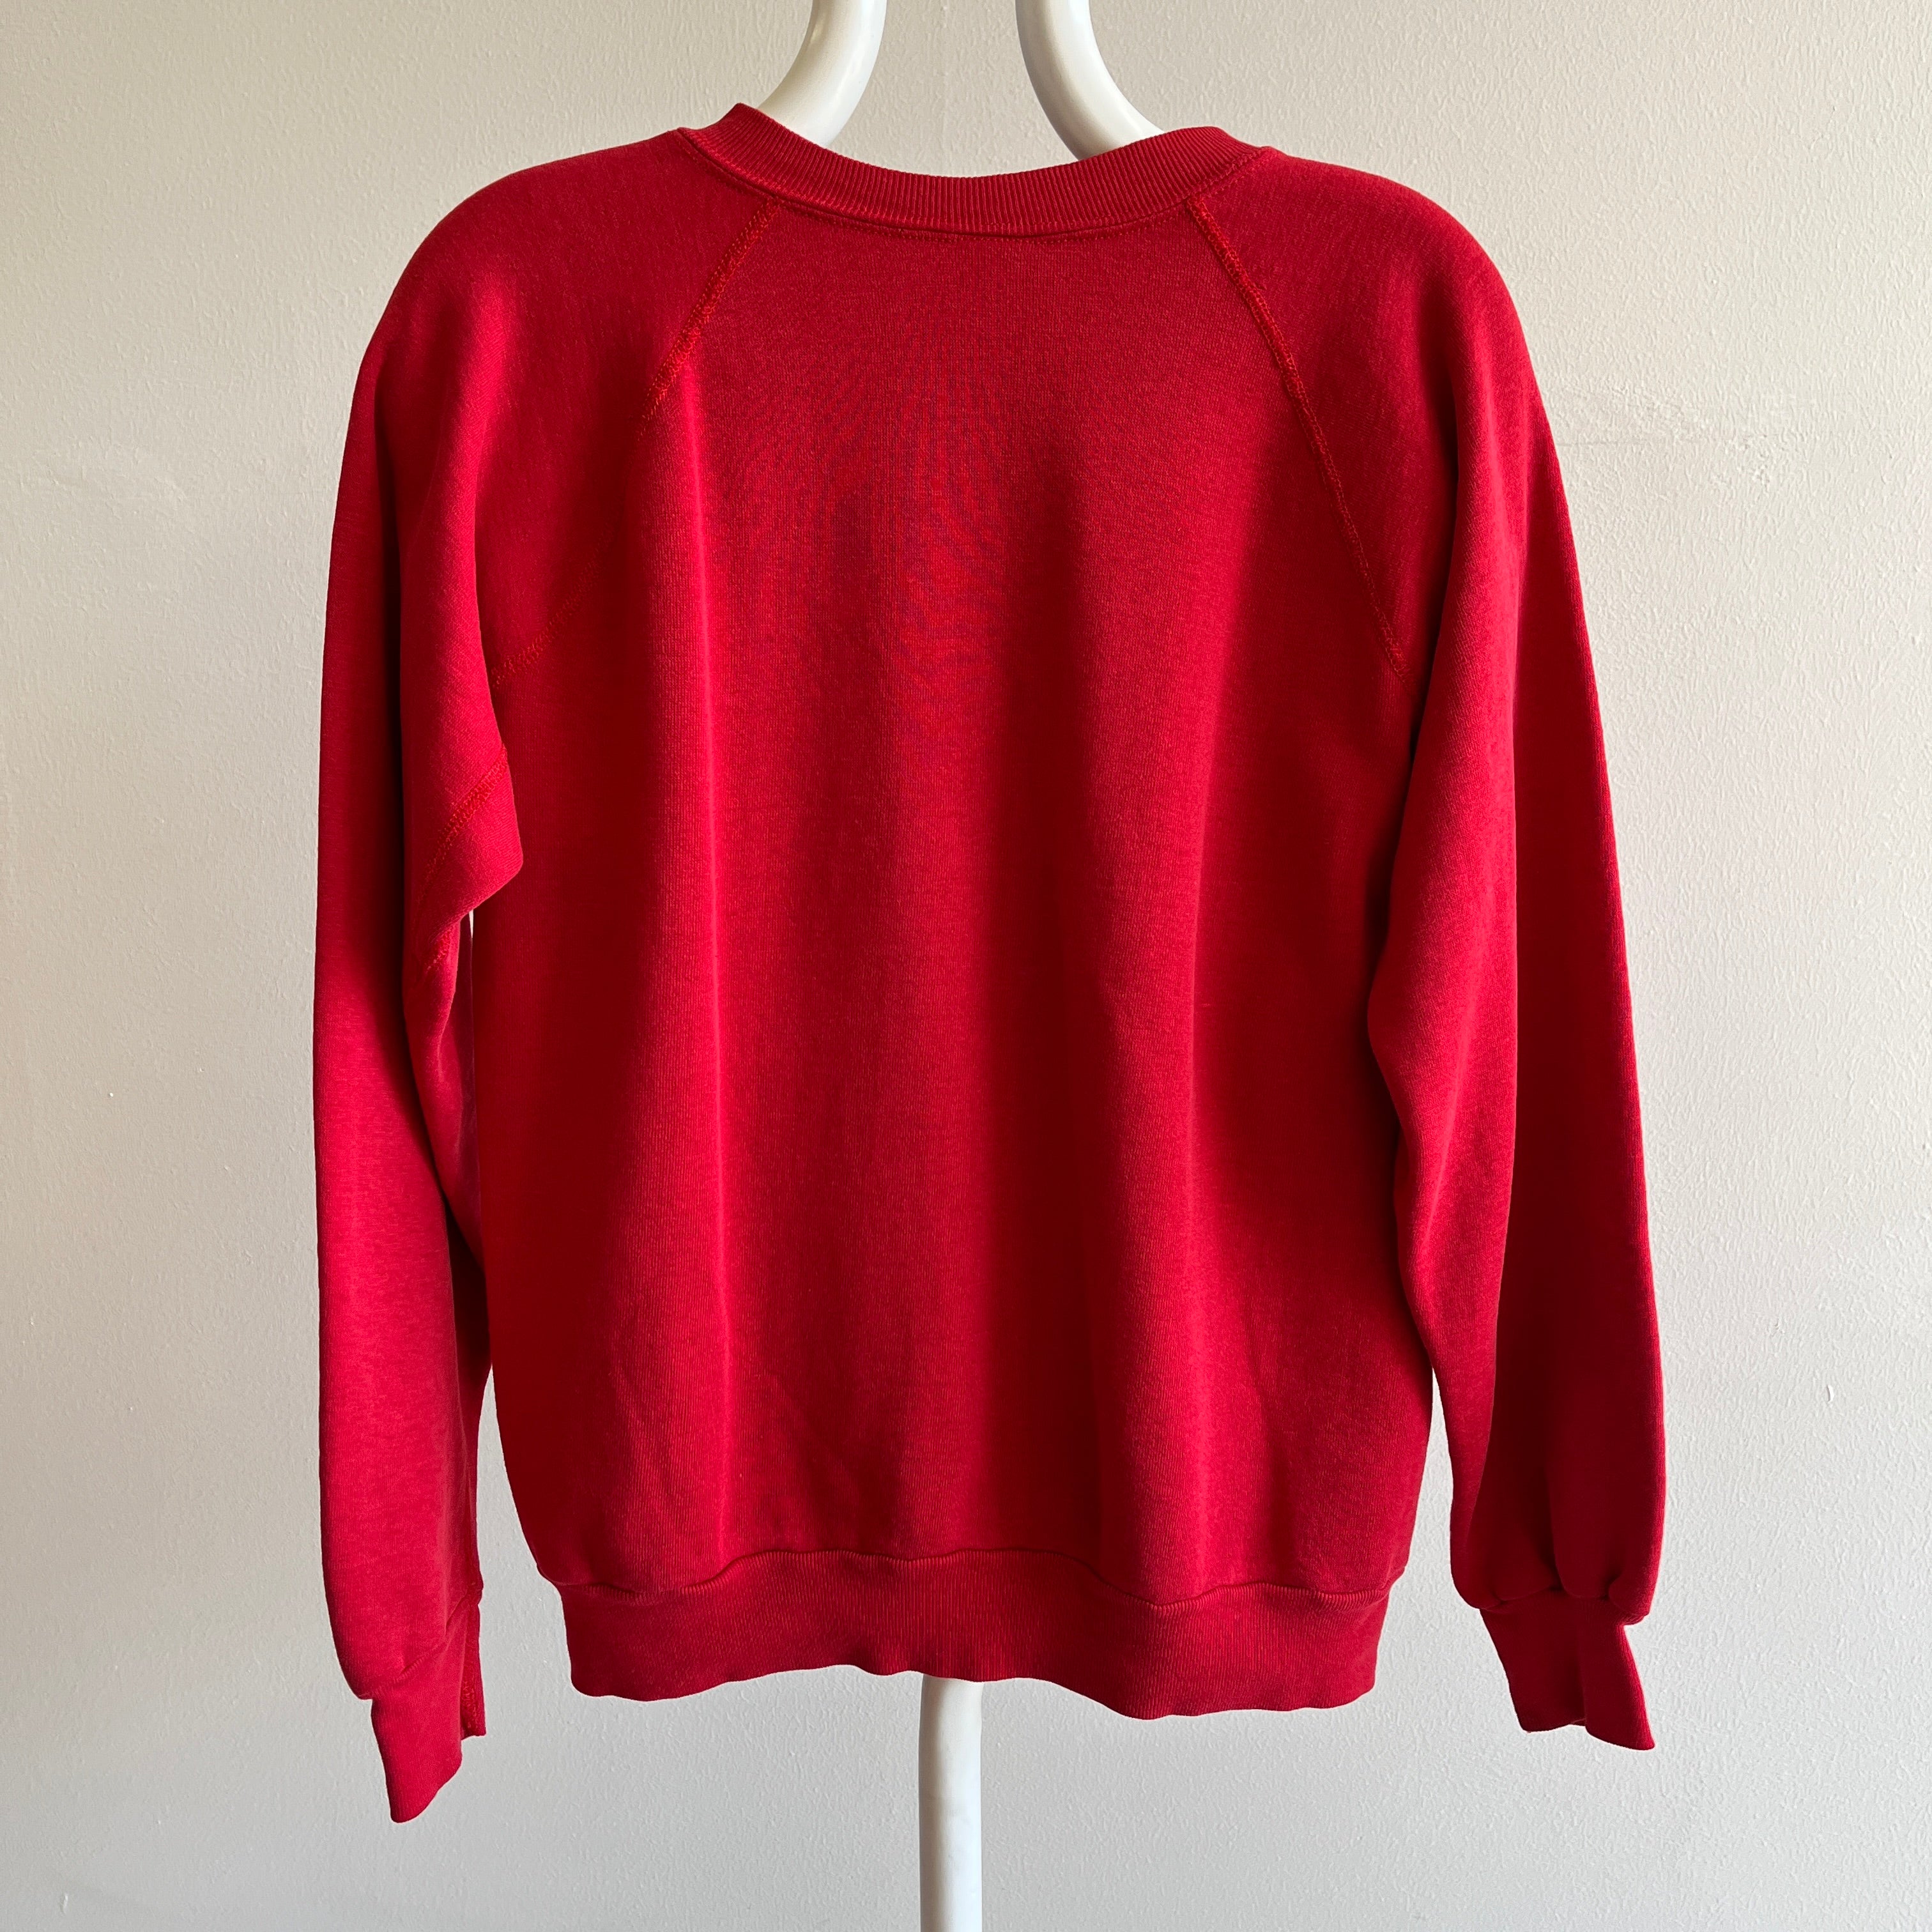 1980s Buttery Soft Arm Gusset Blank Red Sweatshirt - Better Than Your Average!